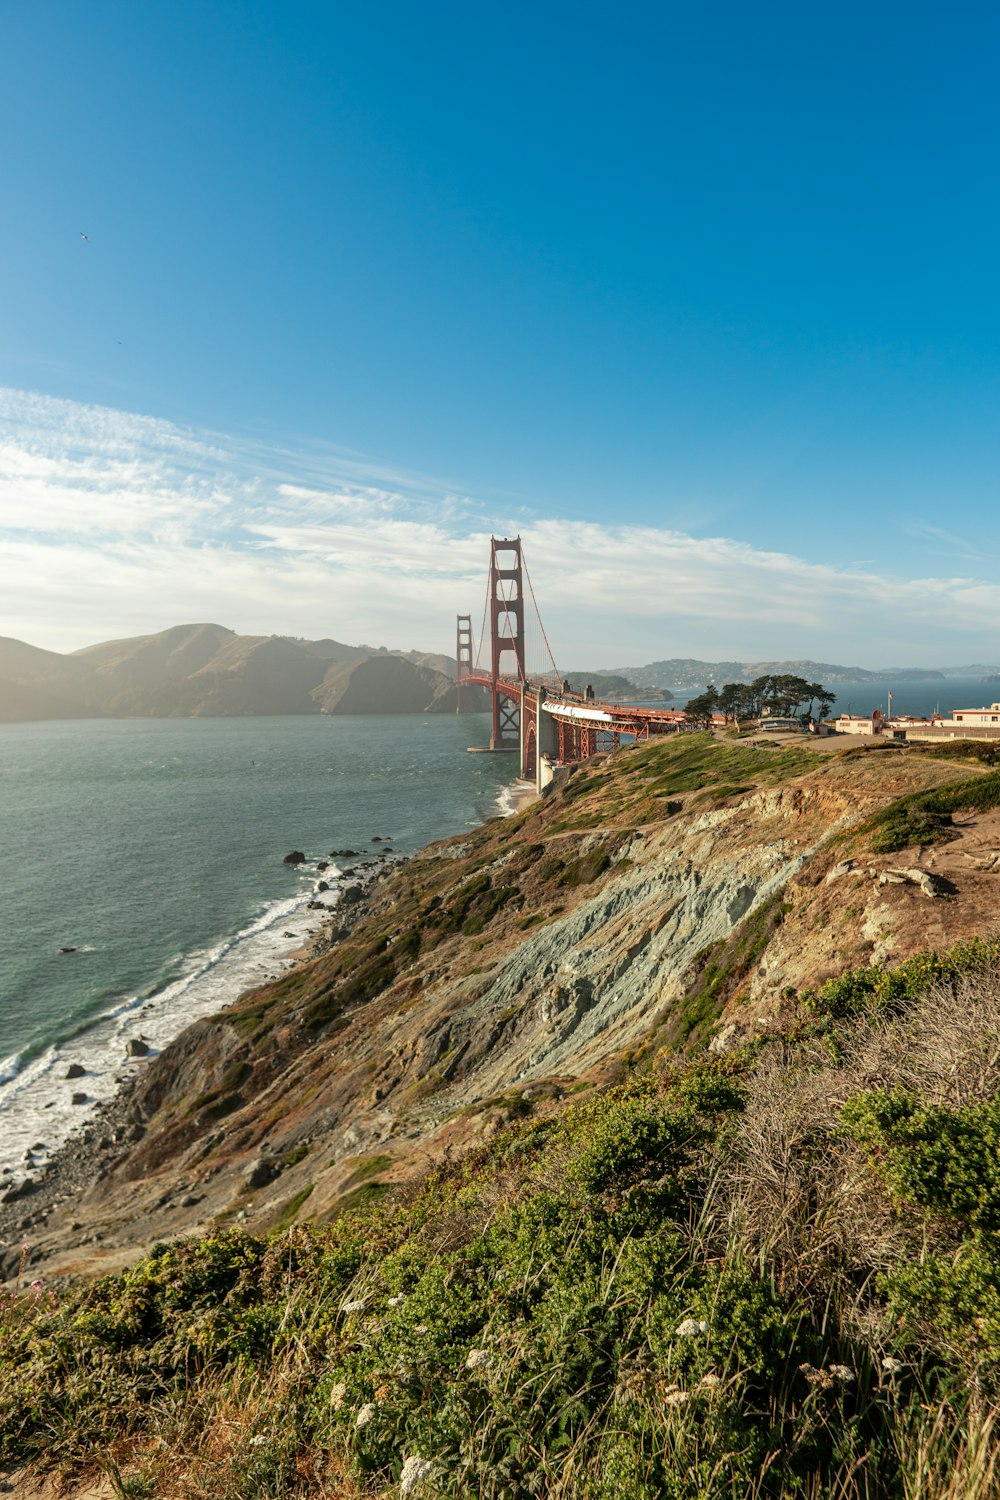 a view of the golden gate bridge from the side of a hill